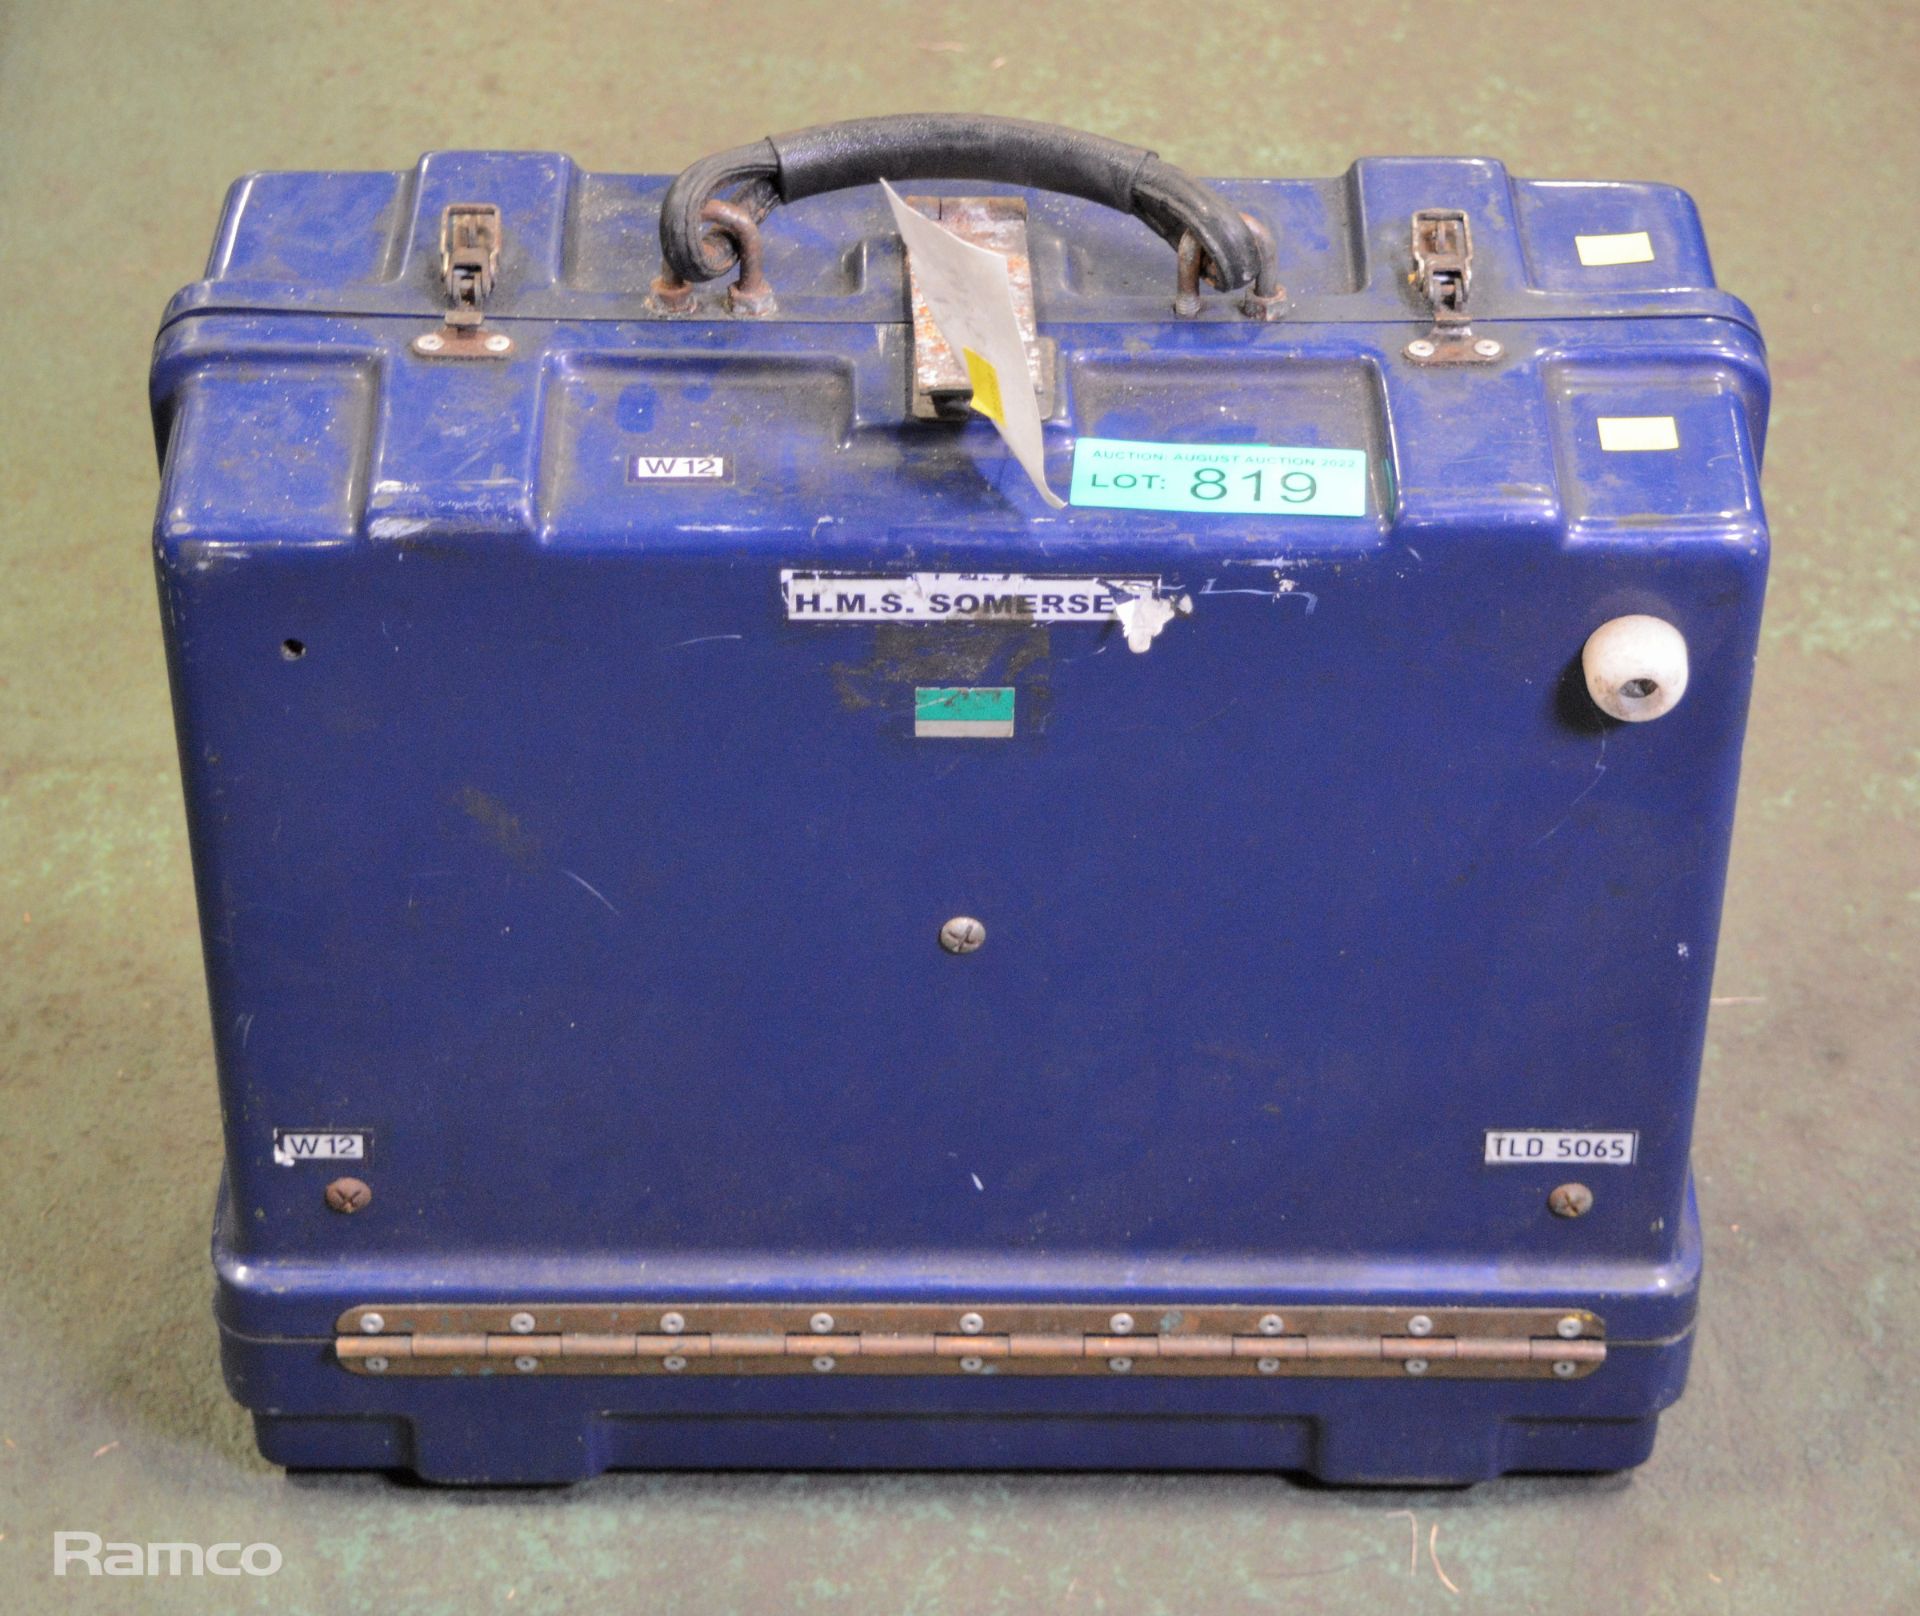 Blue tool box - incomplete - Image 6 of 6